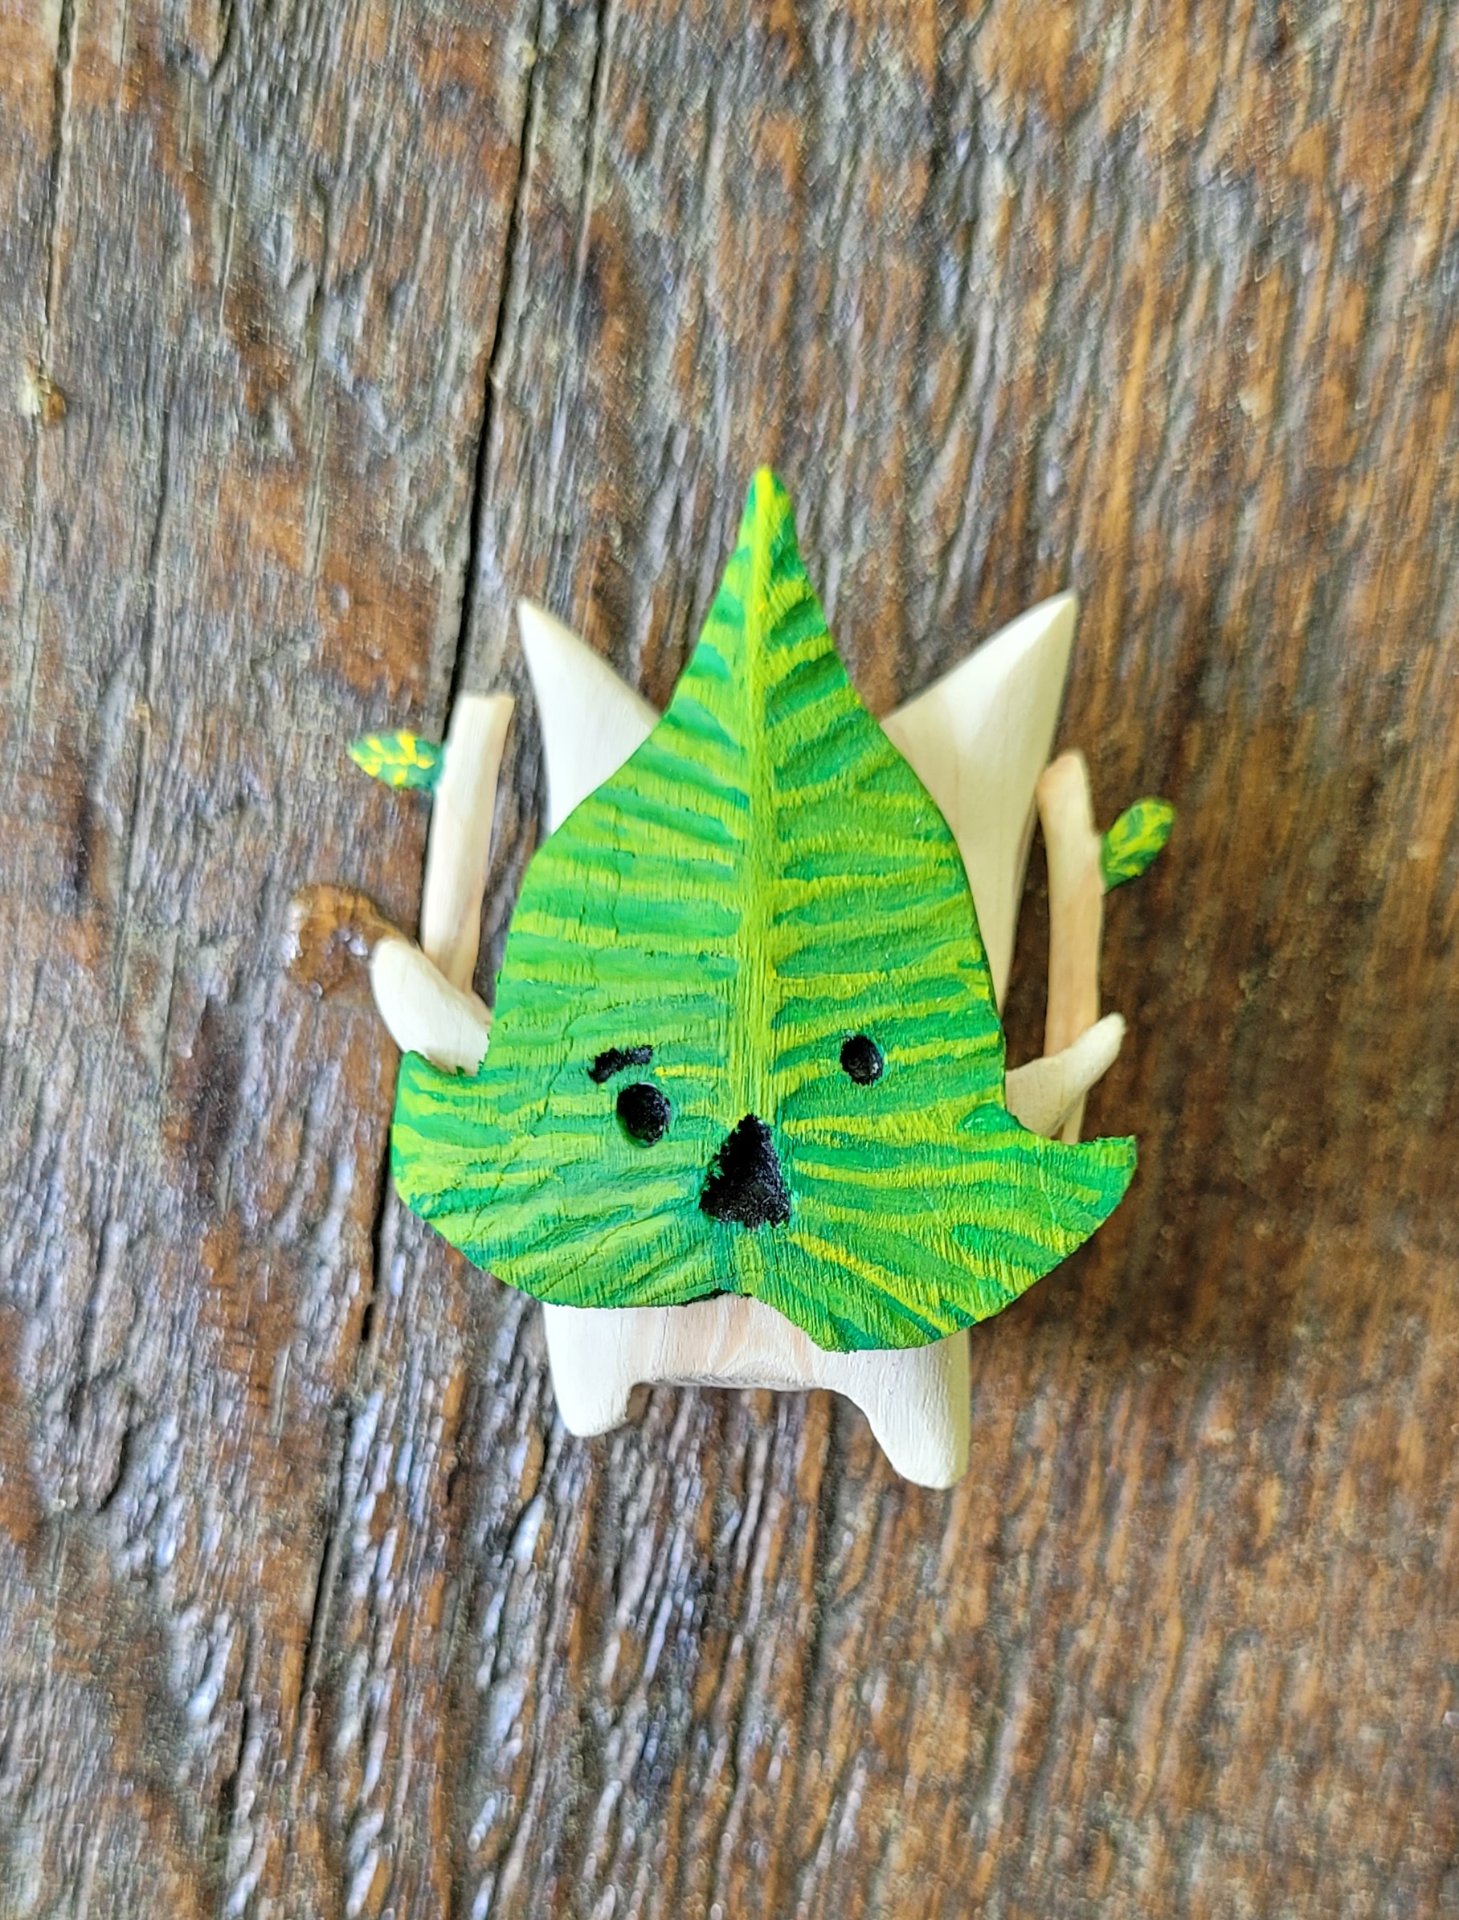 the finished korok all painted up and ready to hide